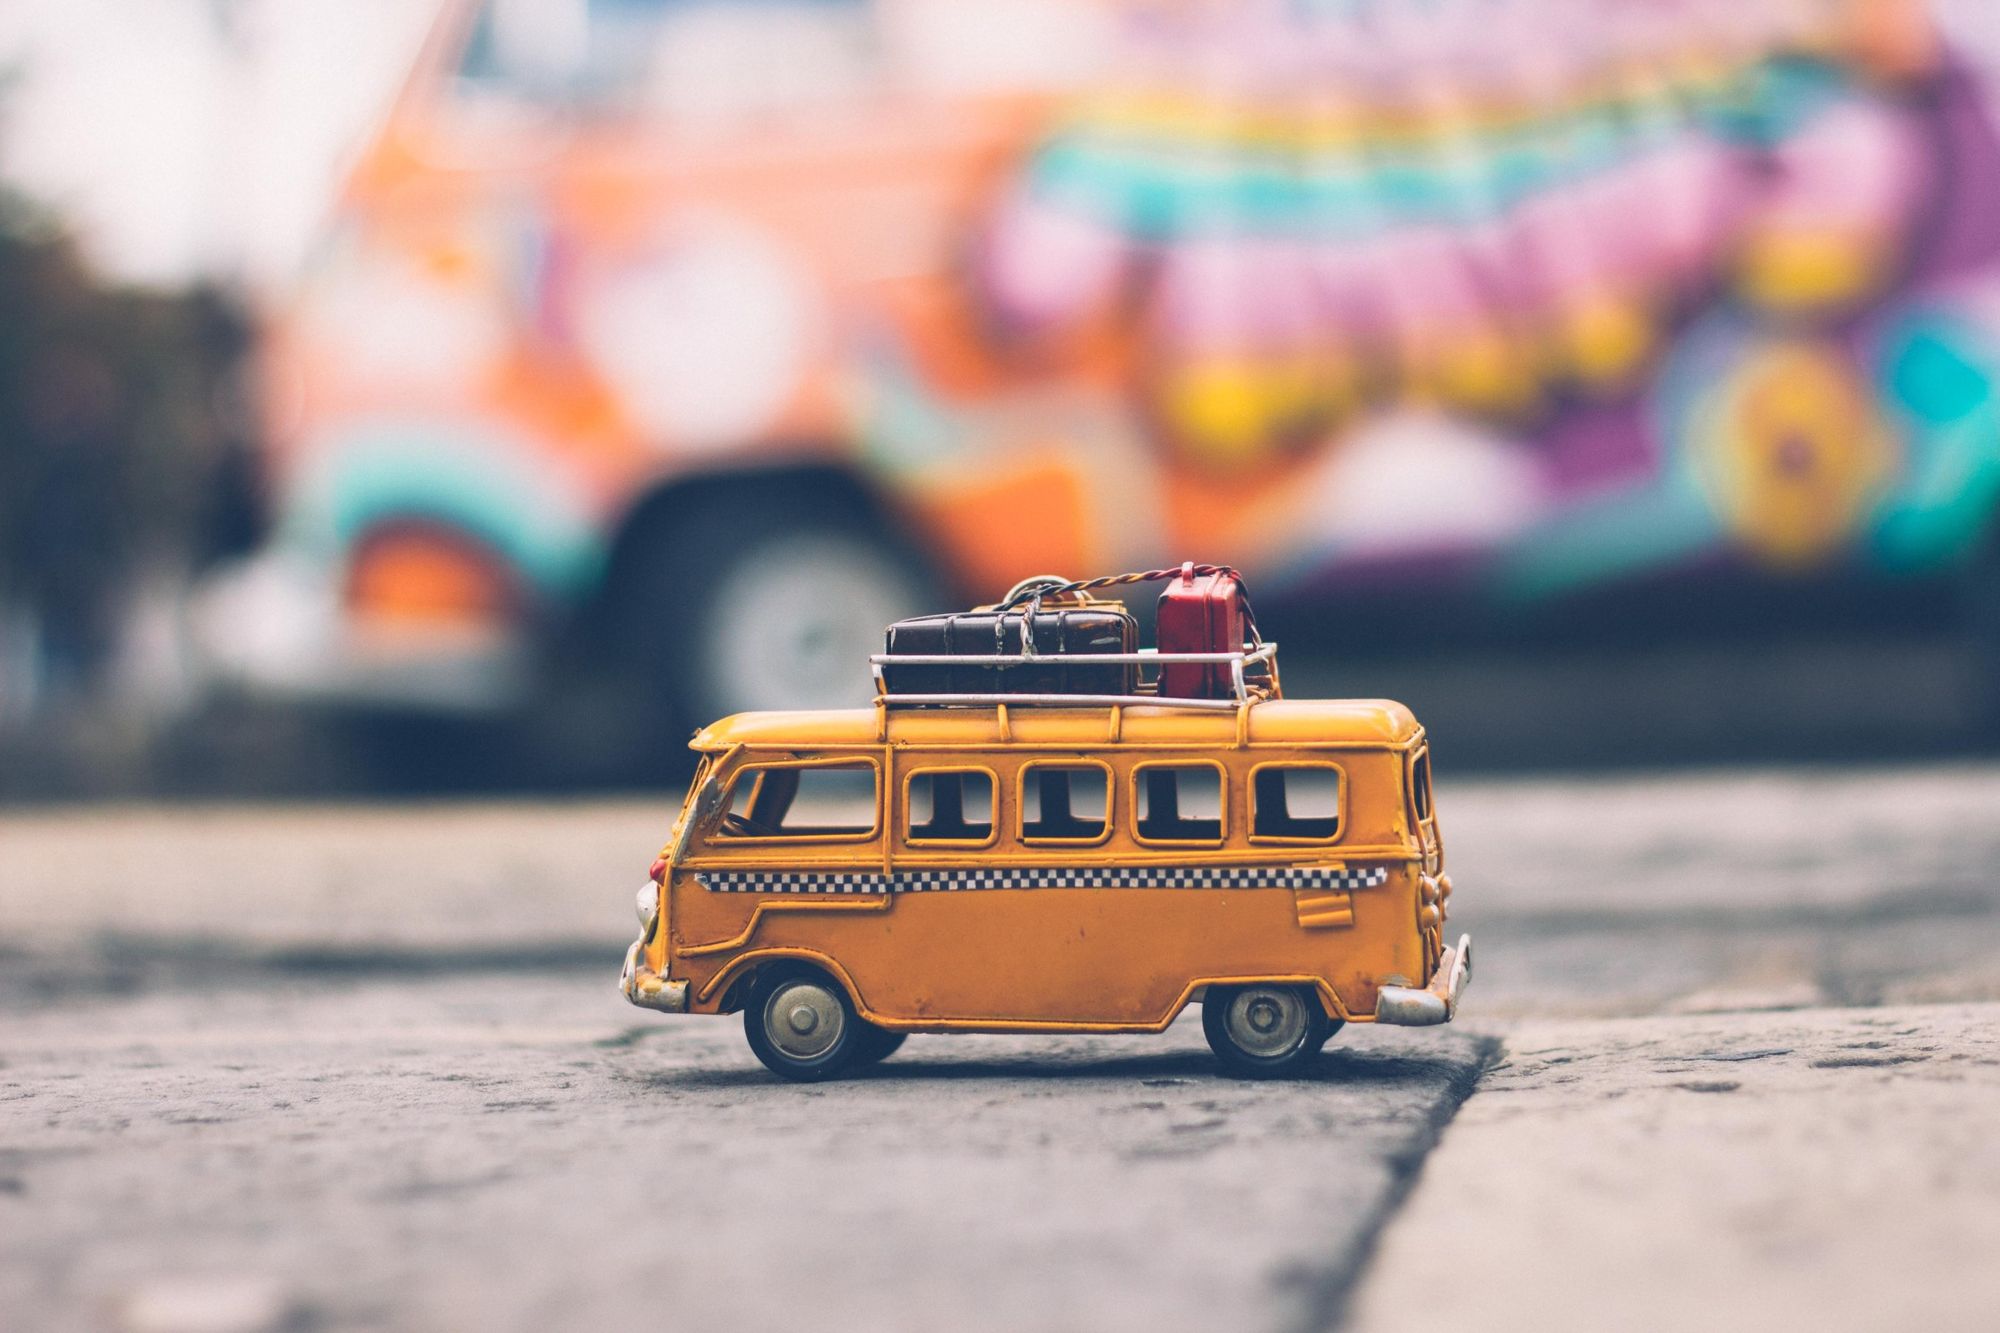 Miniature yellow Volkswagen with luggage strapped onto roof sitting on pavement with blurred life-size Volkswaegen behind